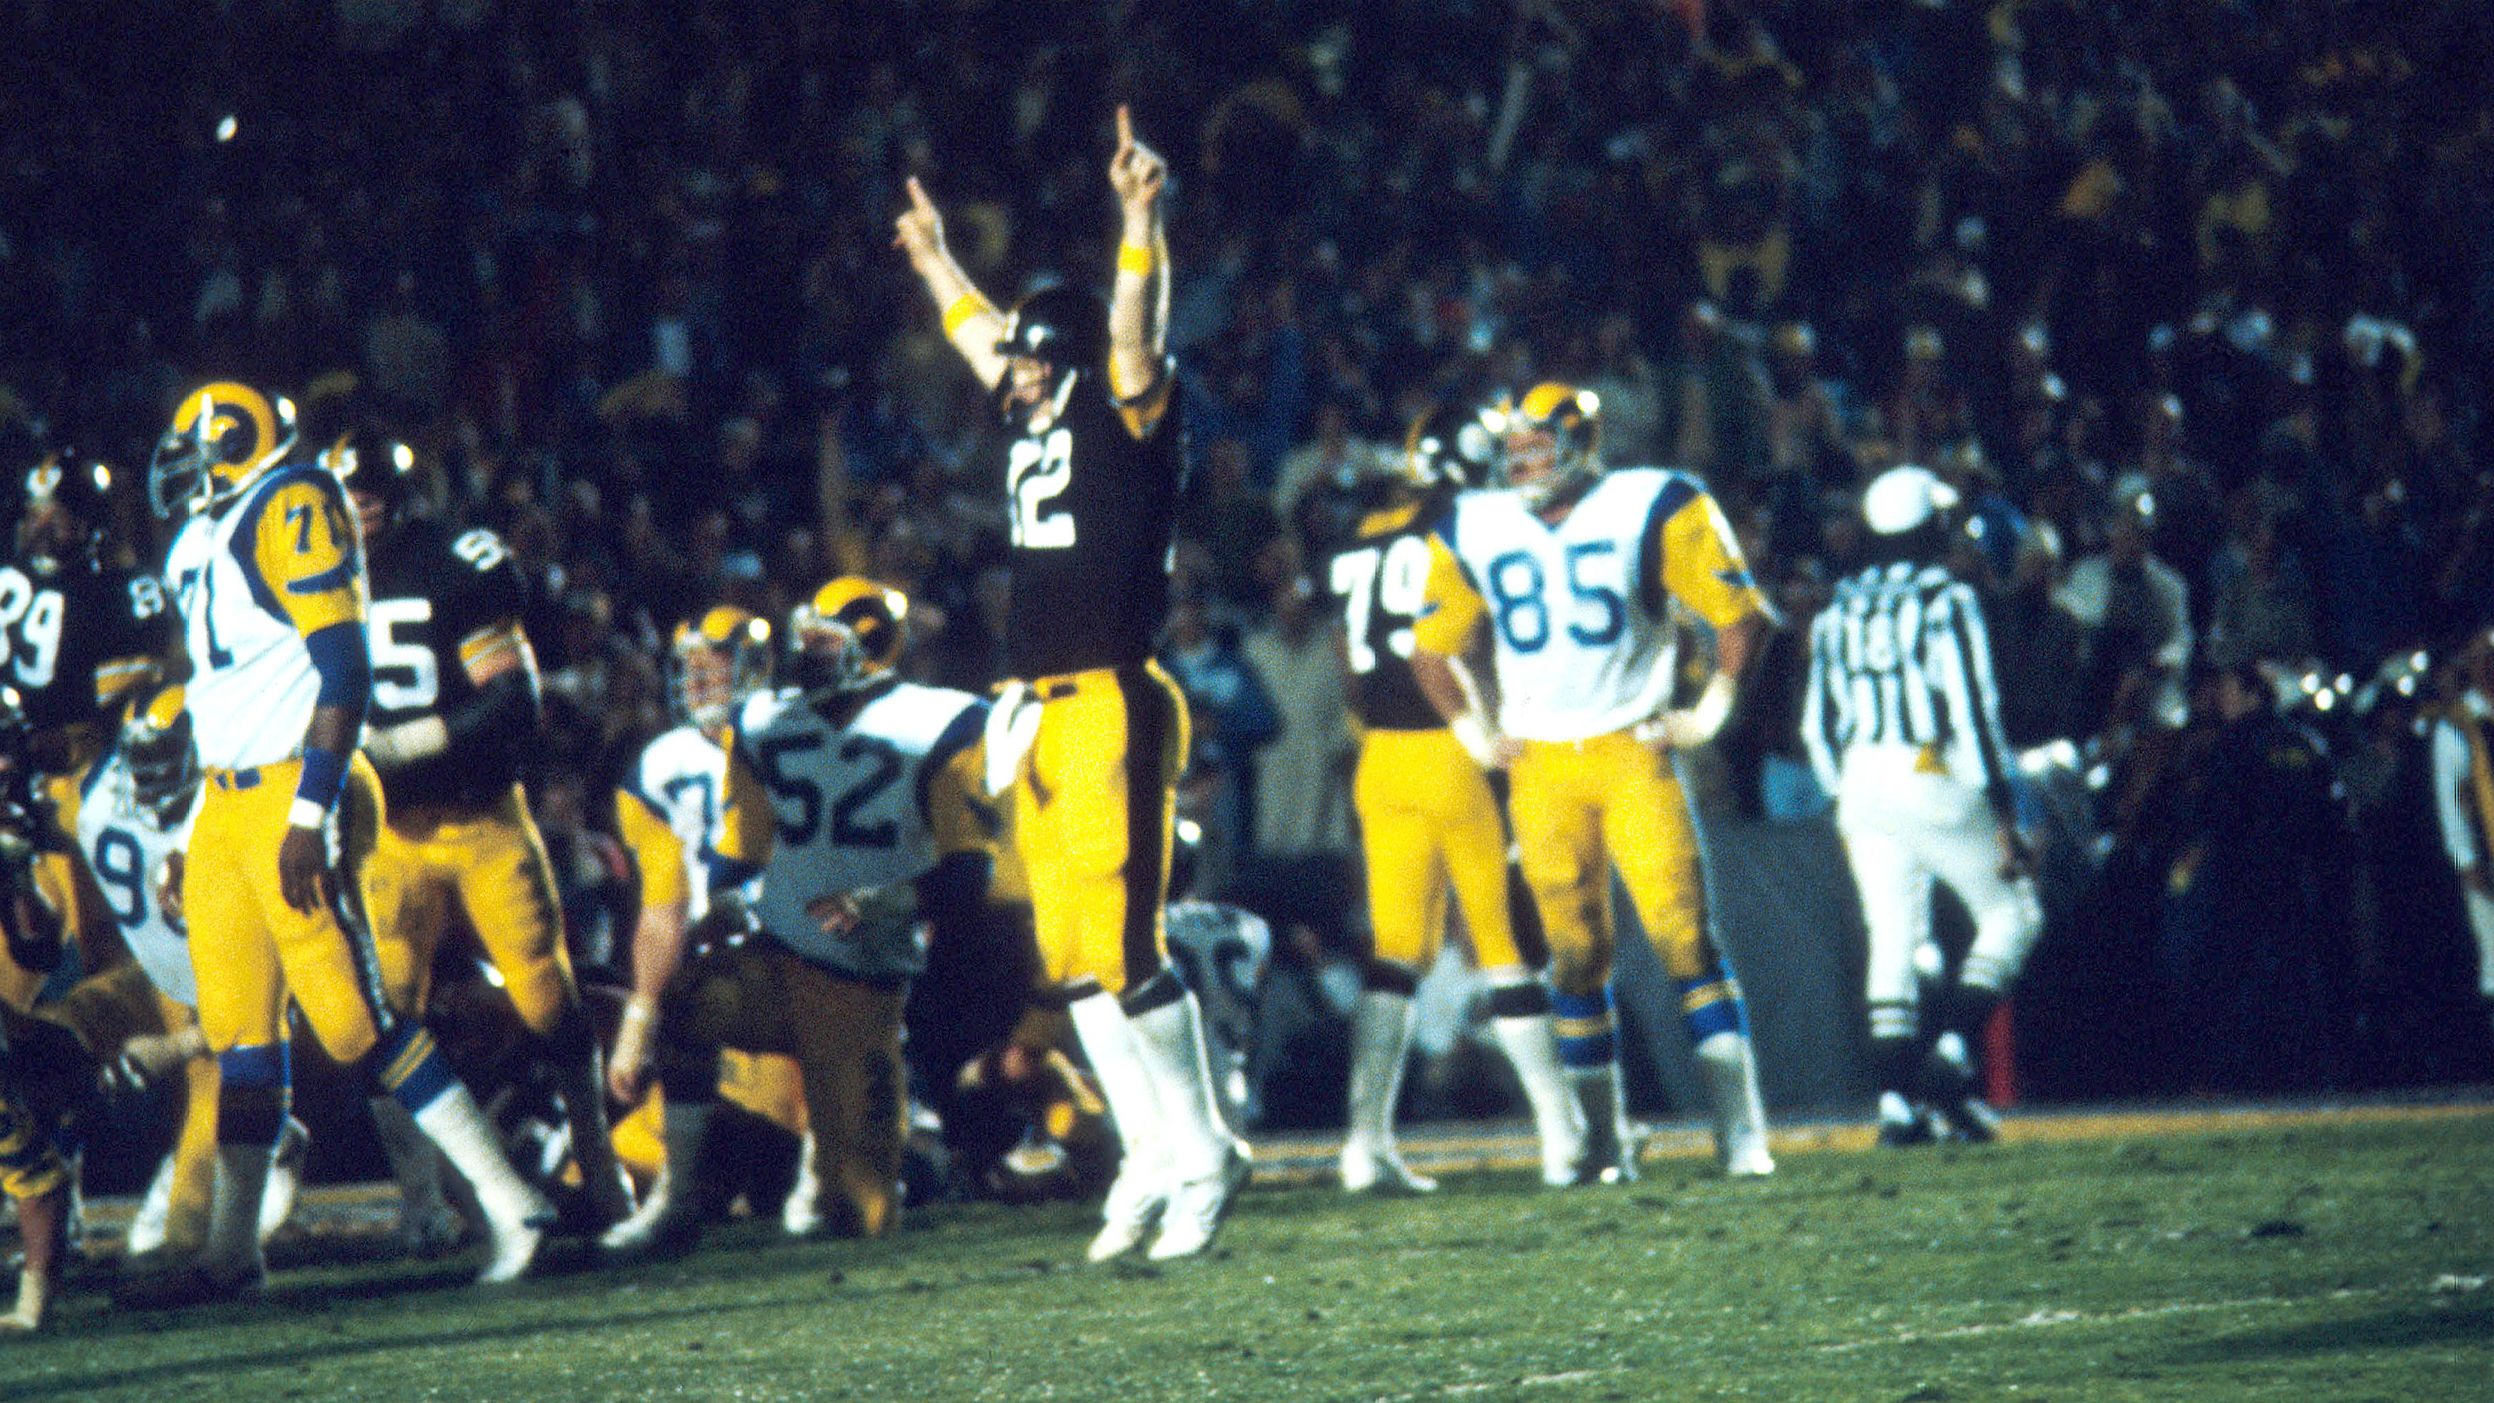 <strong>Super Bowl XIV (1980):</strong> Bradshaw led the way again in Super Bowl XIV, throwing for 309 yards and a pair of touchdowns as the Steelers defeated the Los Angeles Rams 31-19. It was the Steelers' fourth title in six years.